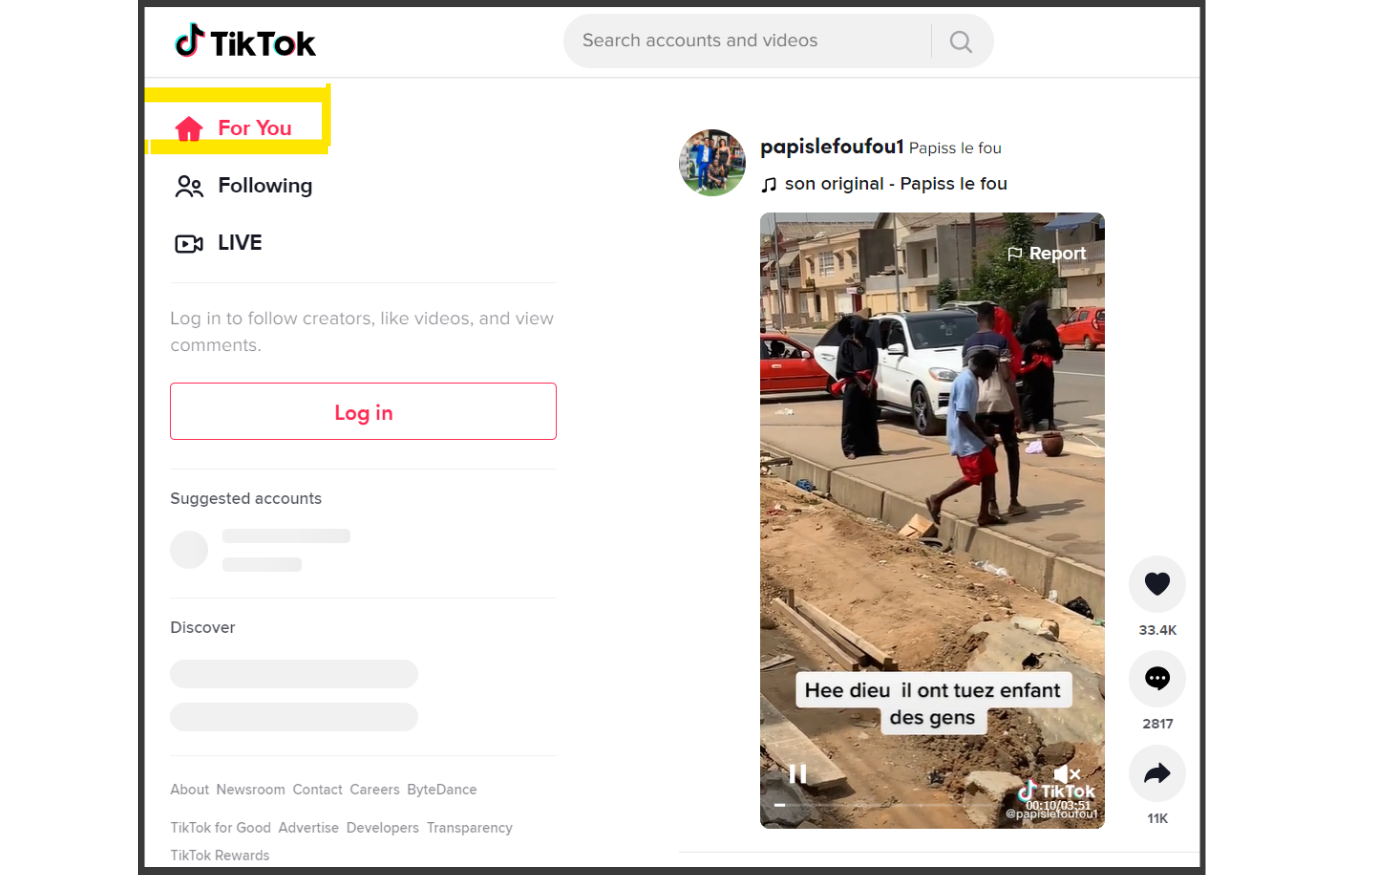 how to make a tiktok account- complete the sign up image.